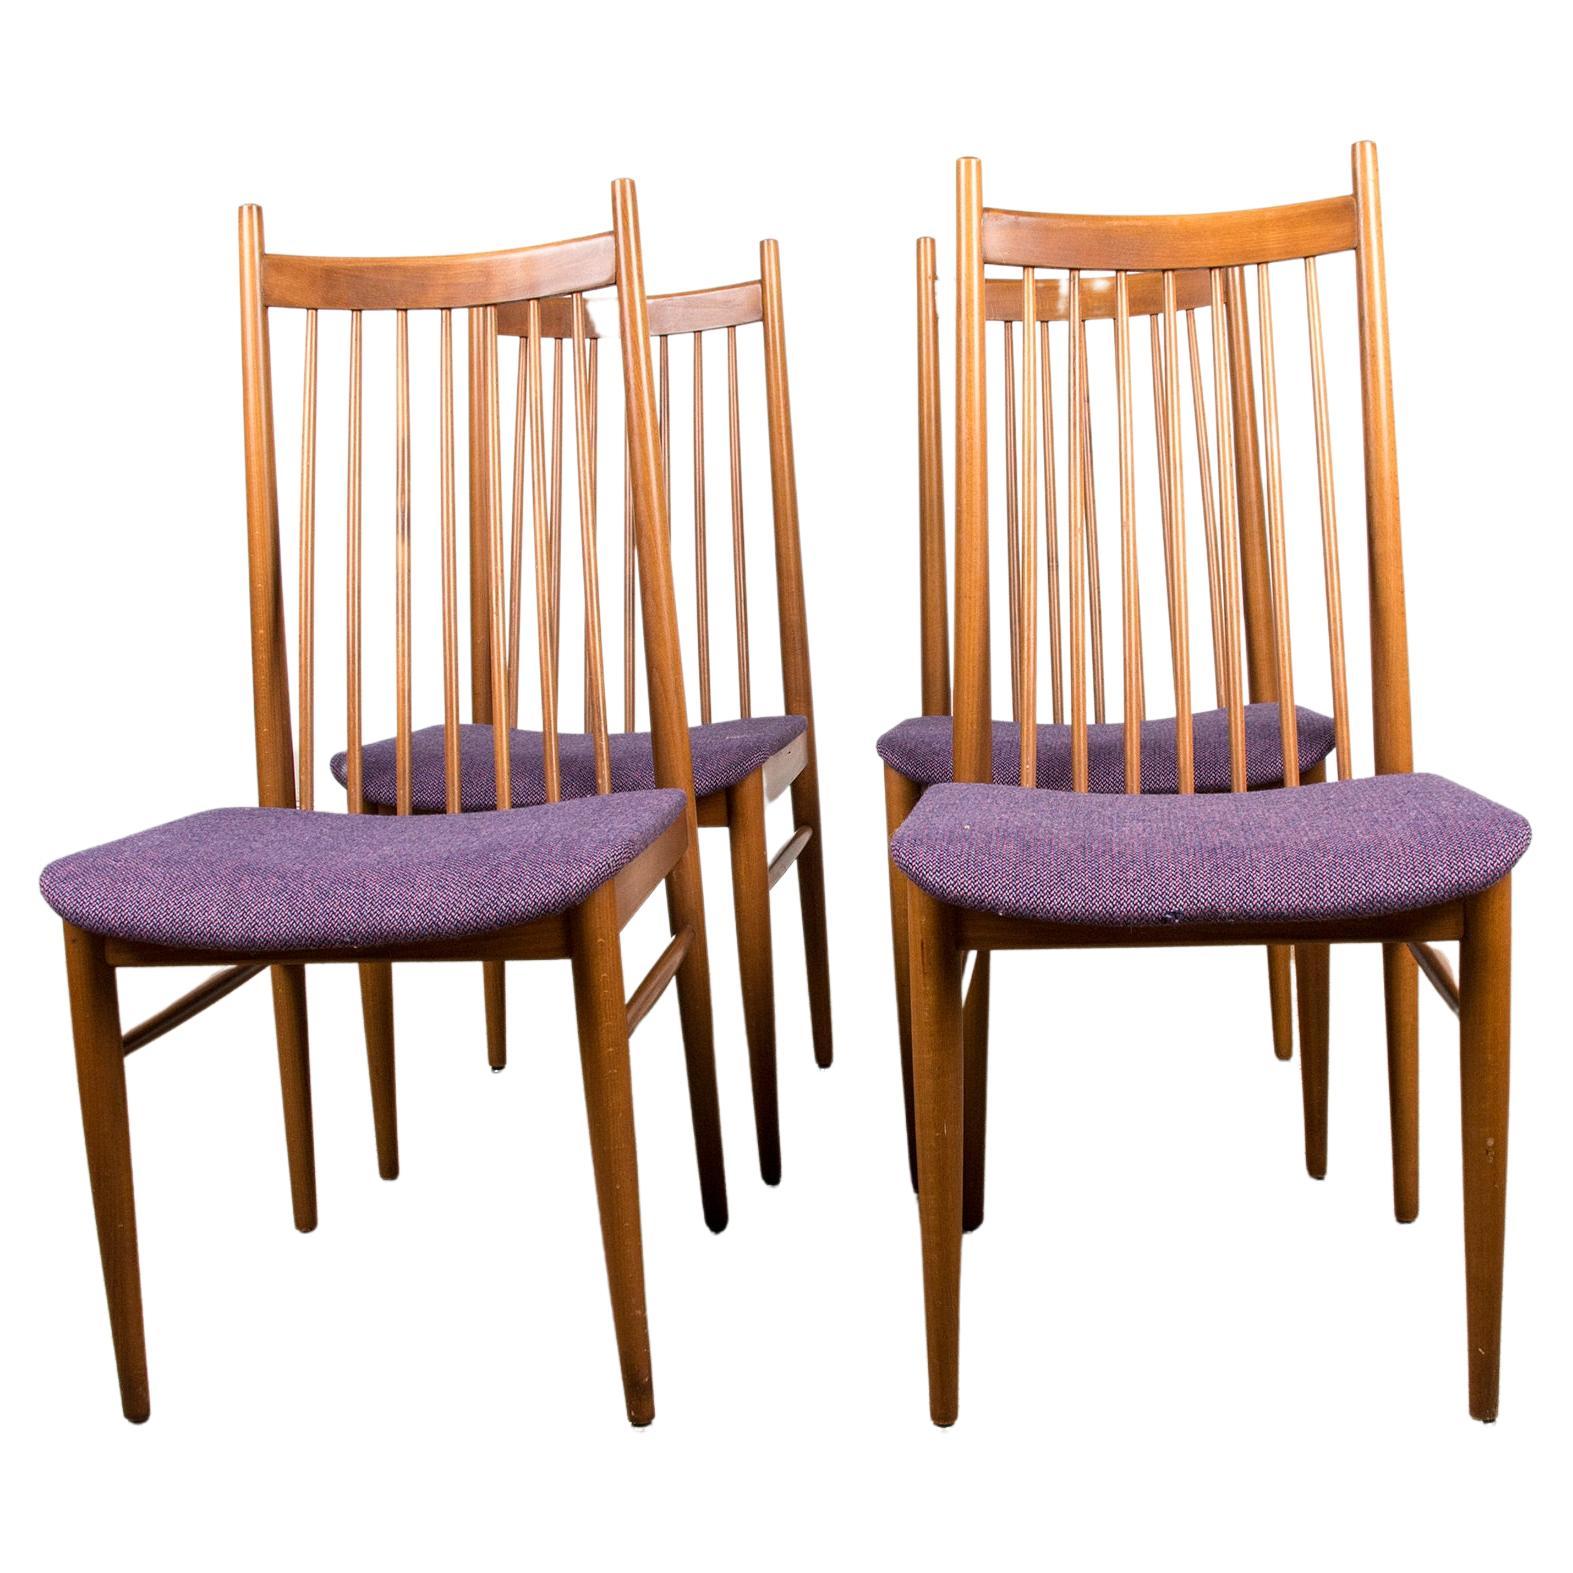 Series of 4 Large Danish Teak and Fabric Dining Chairs, Style of Arne Vodder For Sale